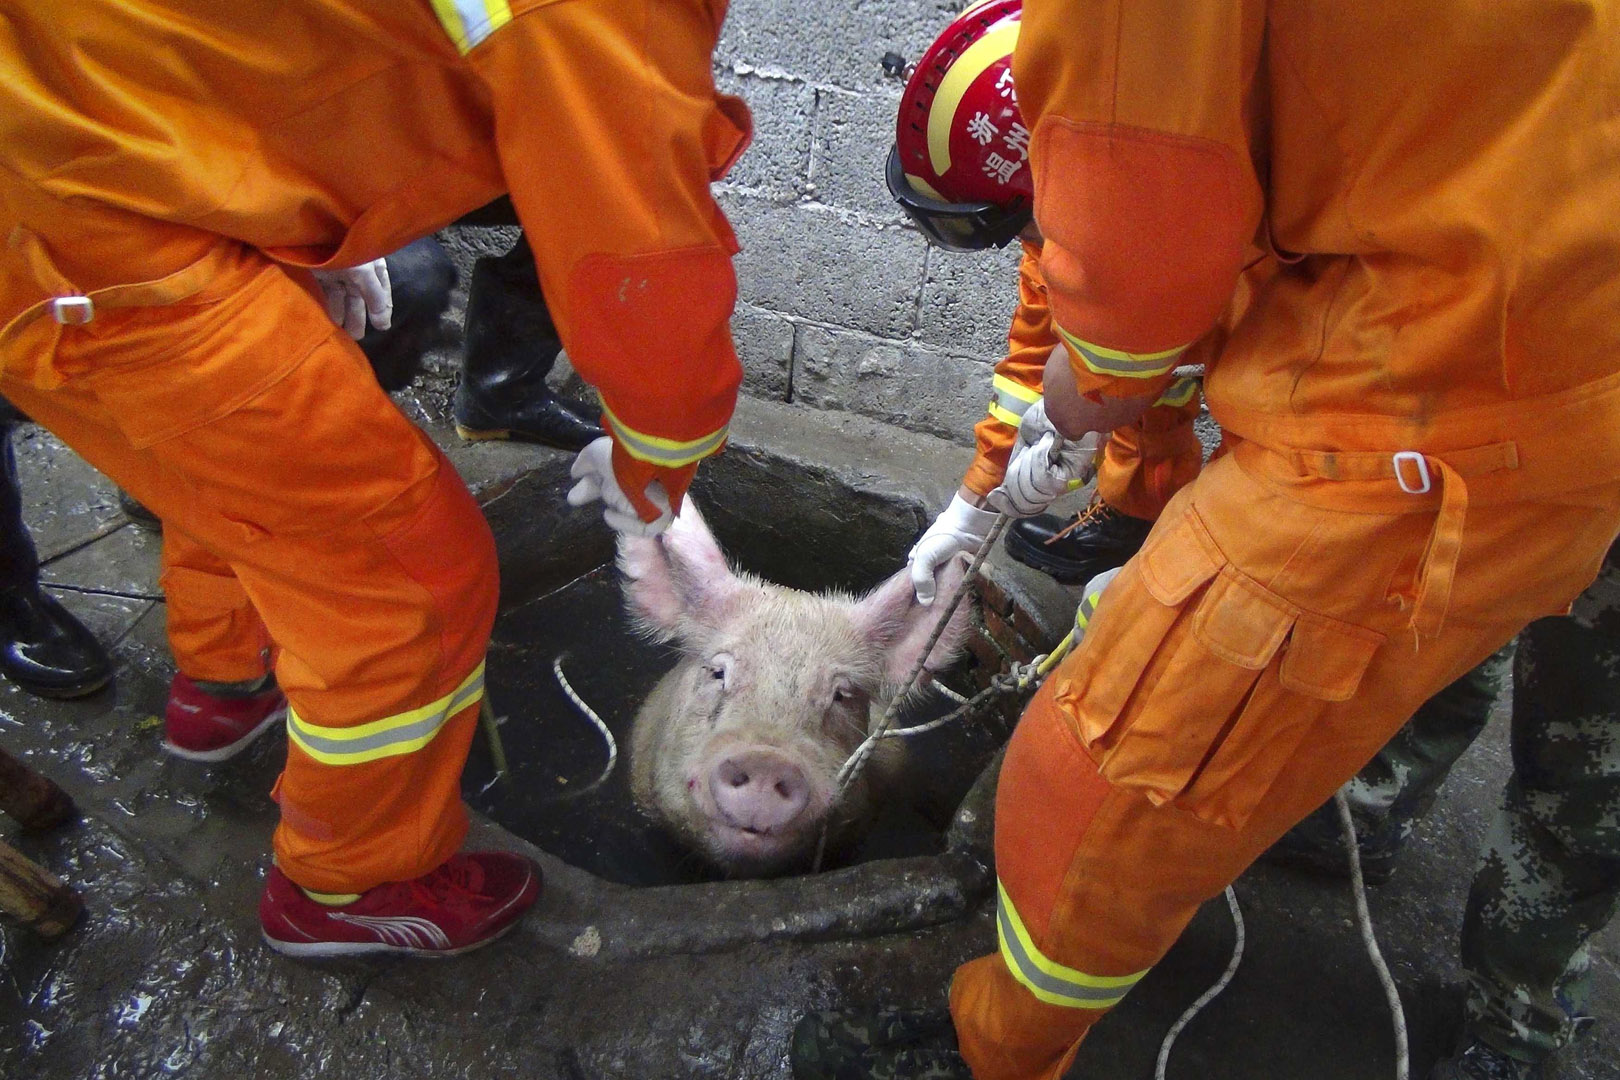 Firefighters pull a pig from a well on a pig farm in Lequing, China. Seven firefighters successfully rescued the 661-pound pig in April.